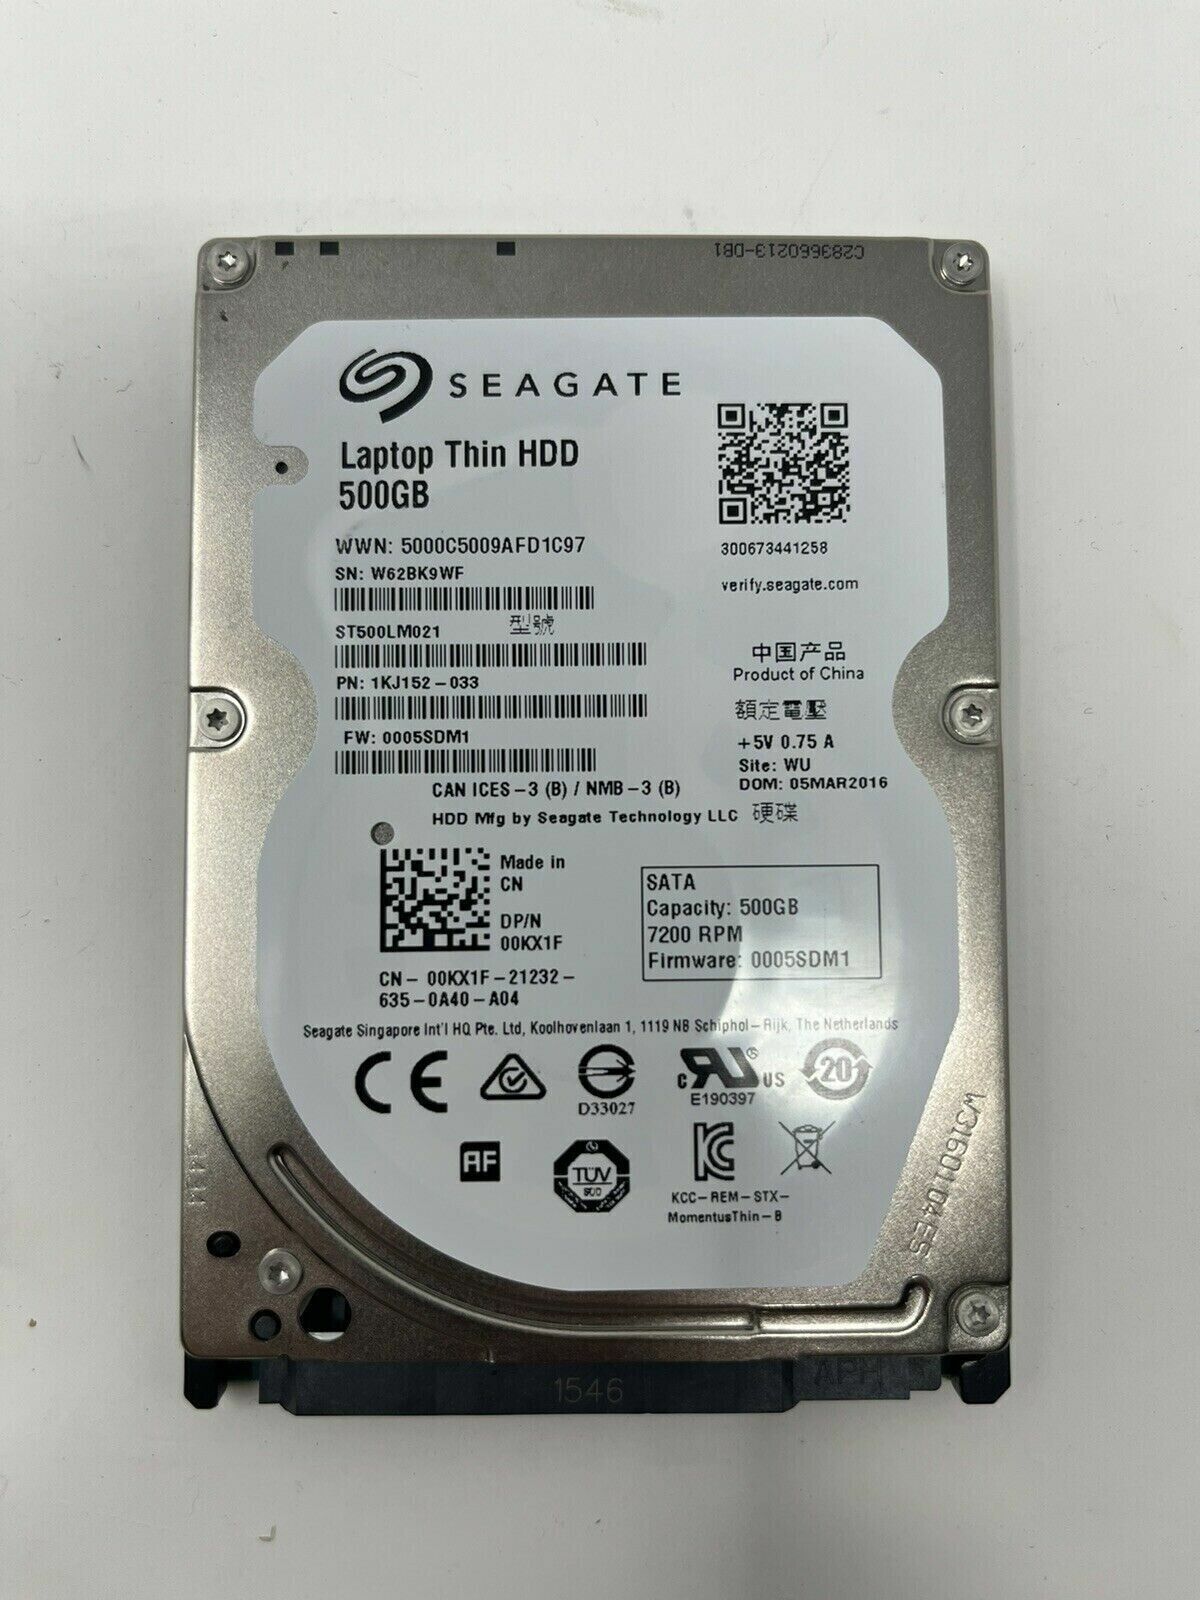 Seagate Laptop Thin HDD ST500LM021 500GB 2.5\